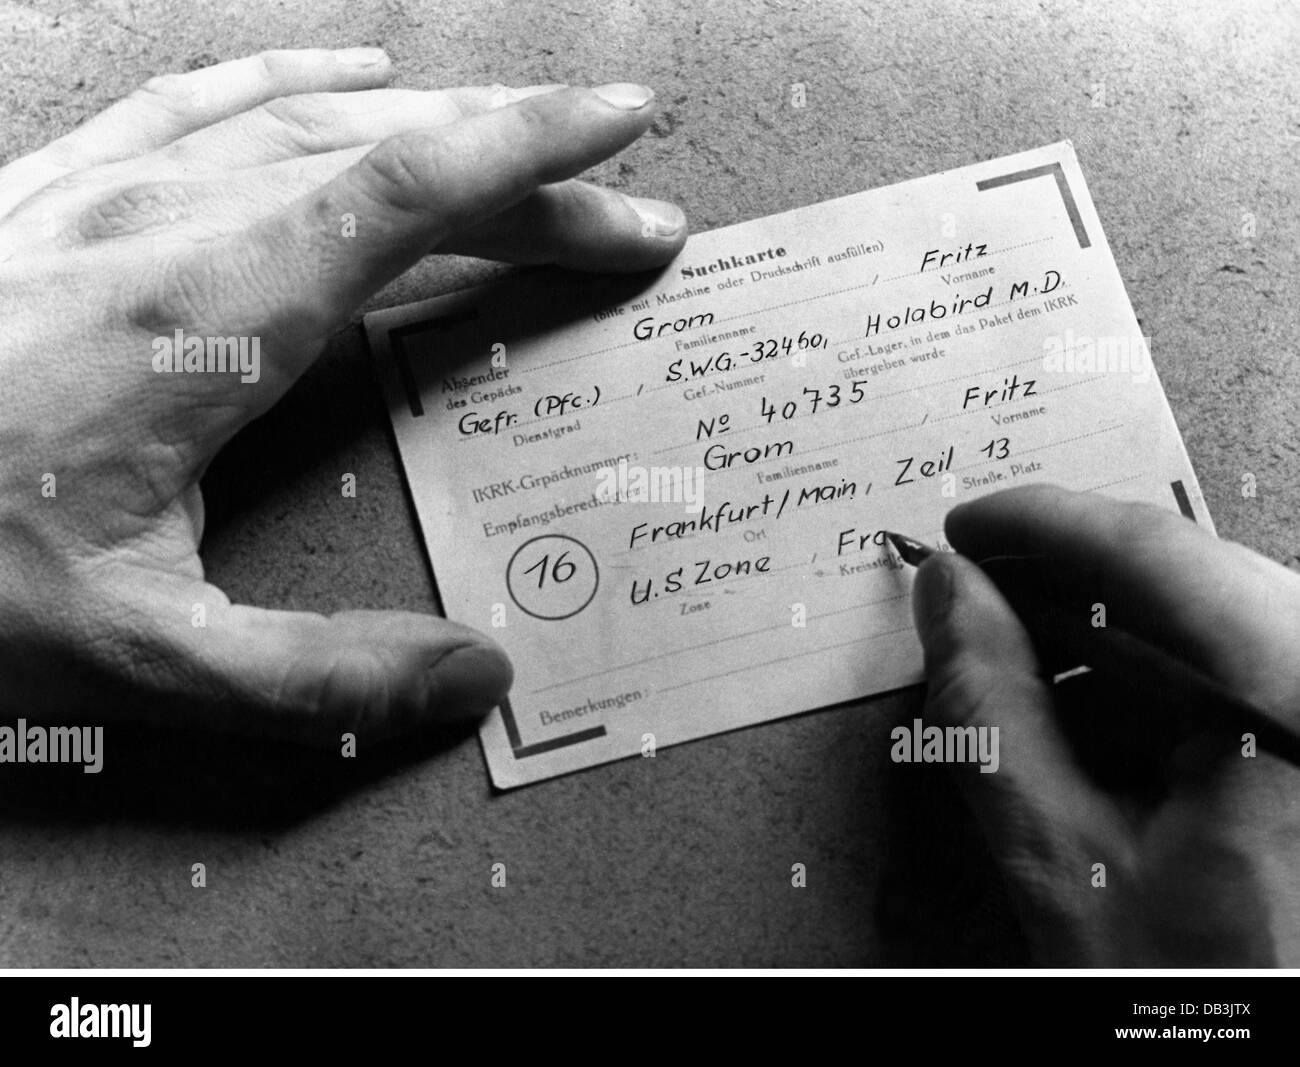 post war period, prisoner of war, USA, search card of the international committee of the red cross for baggage, German private Fritz Grom, Camp Holabird, Maryland, circa 1948, Additional-Rights-Clearences-Not Available Stock Photo